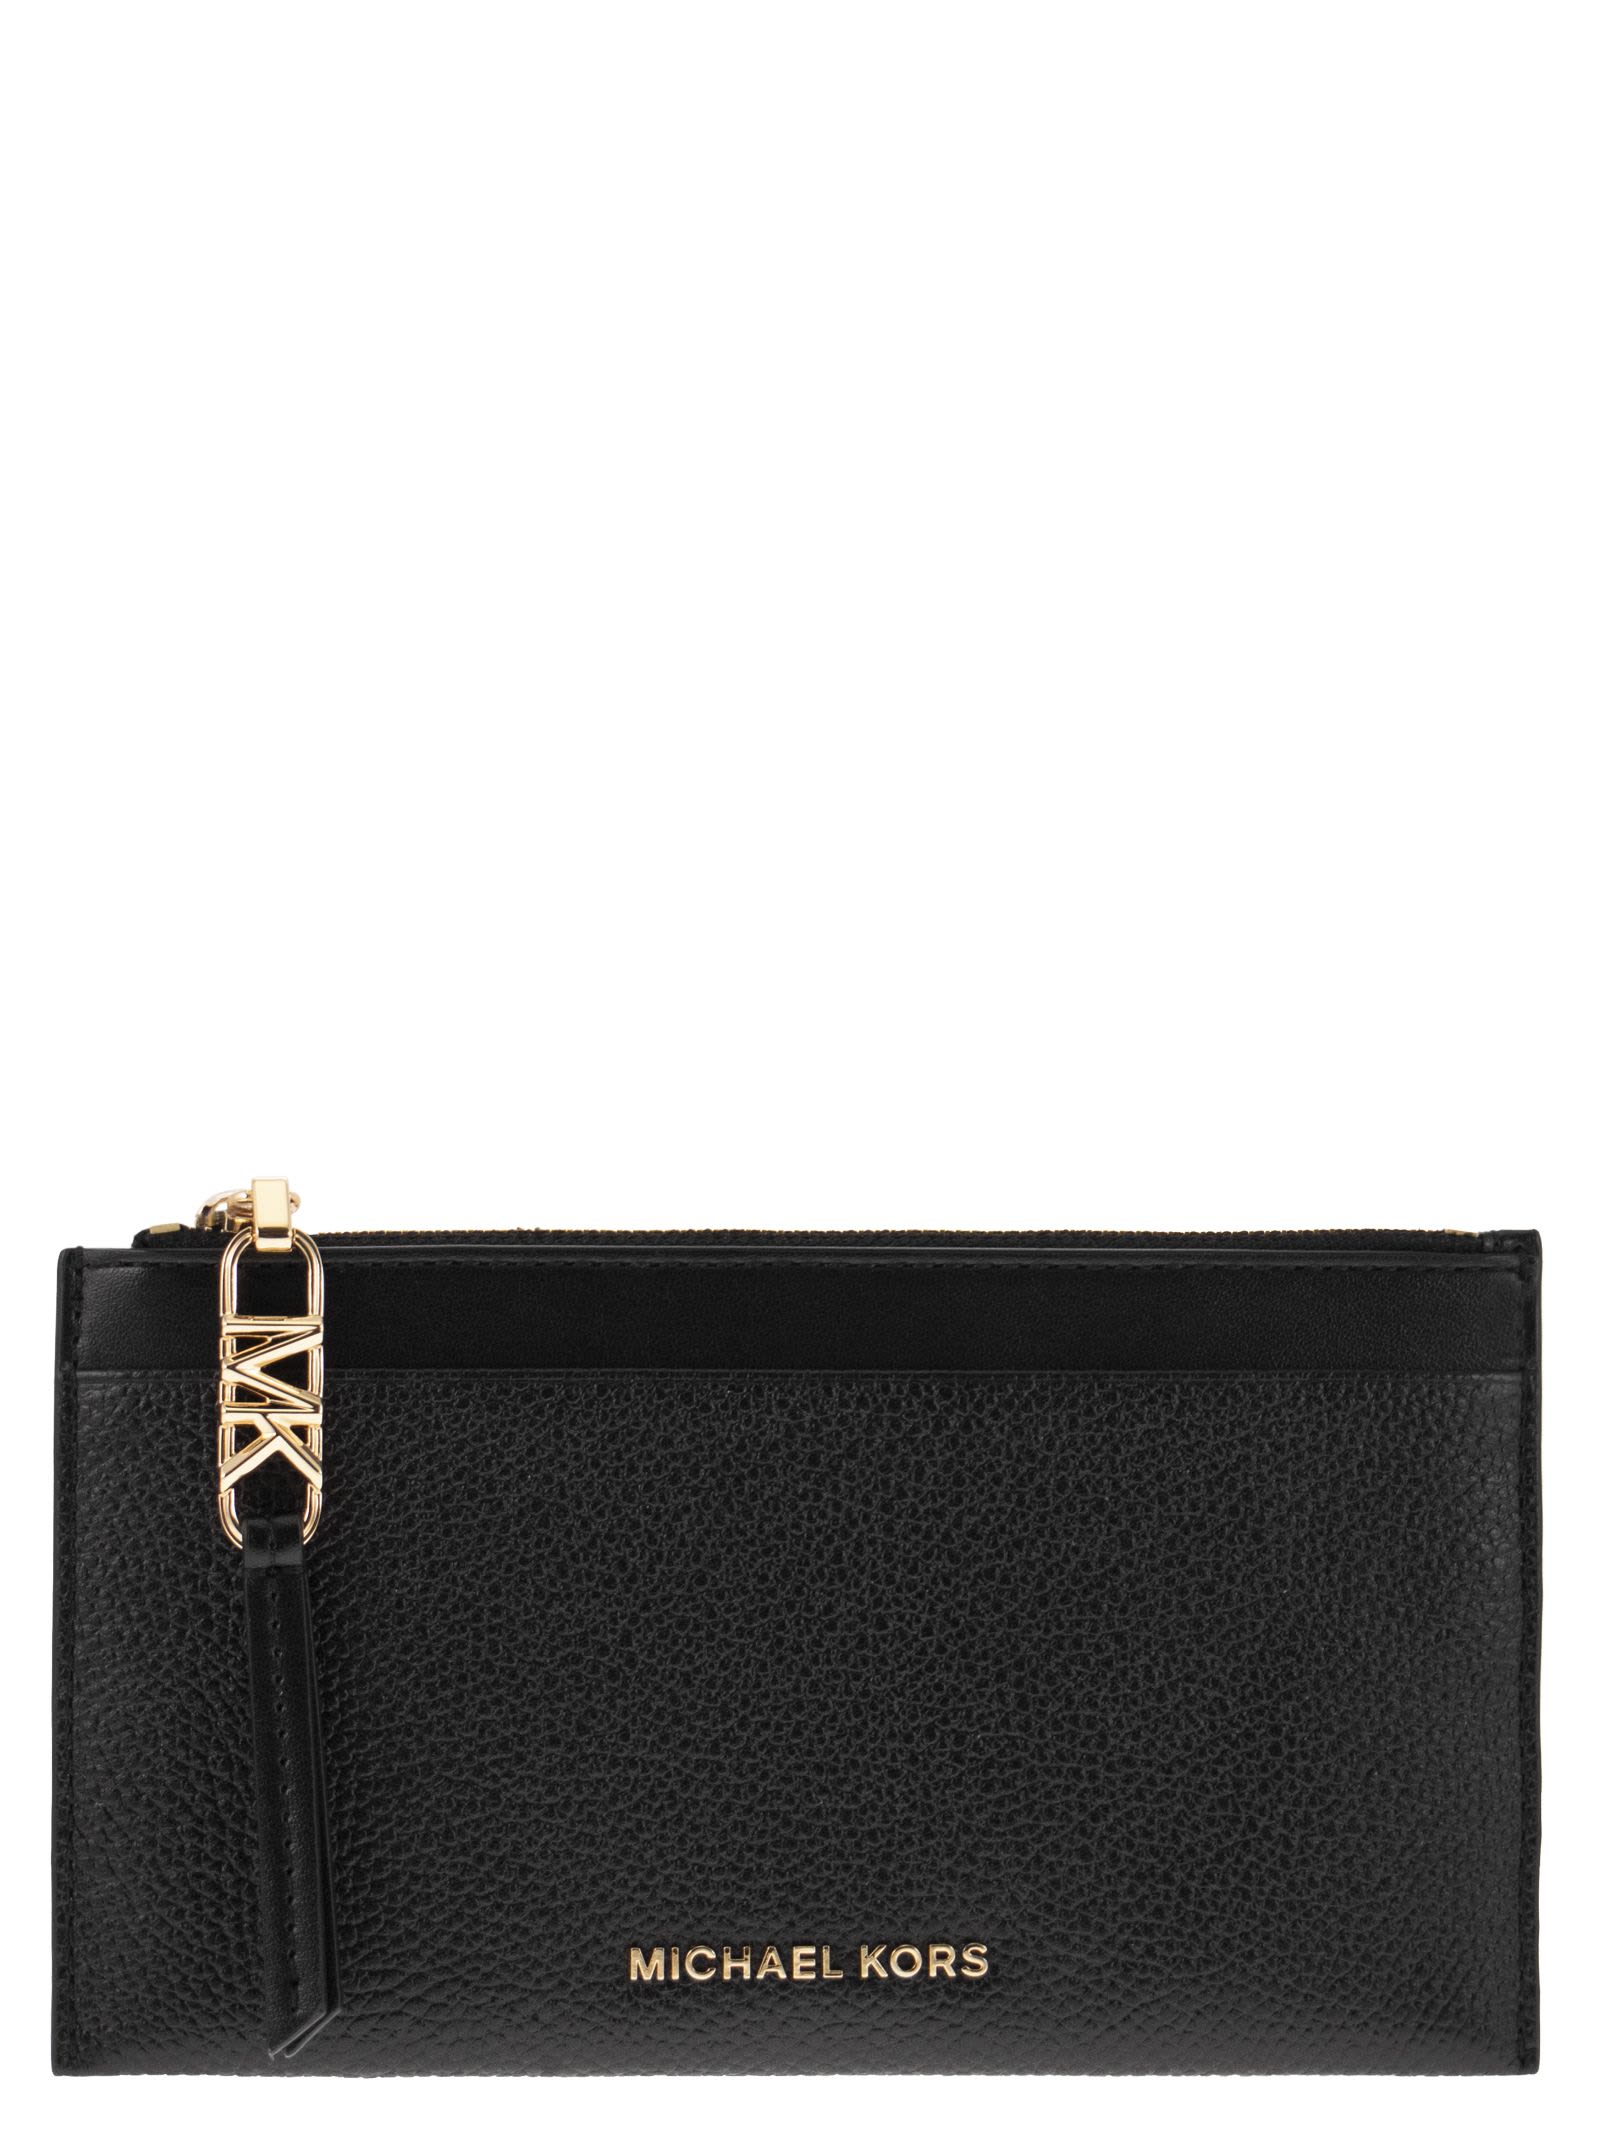 Michael Kors Large Credit Card Holder In Grained Leather - Black - female - Size: 0one size